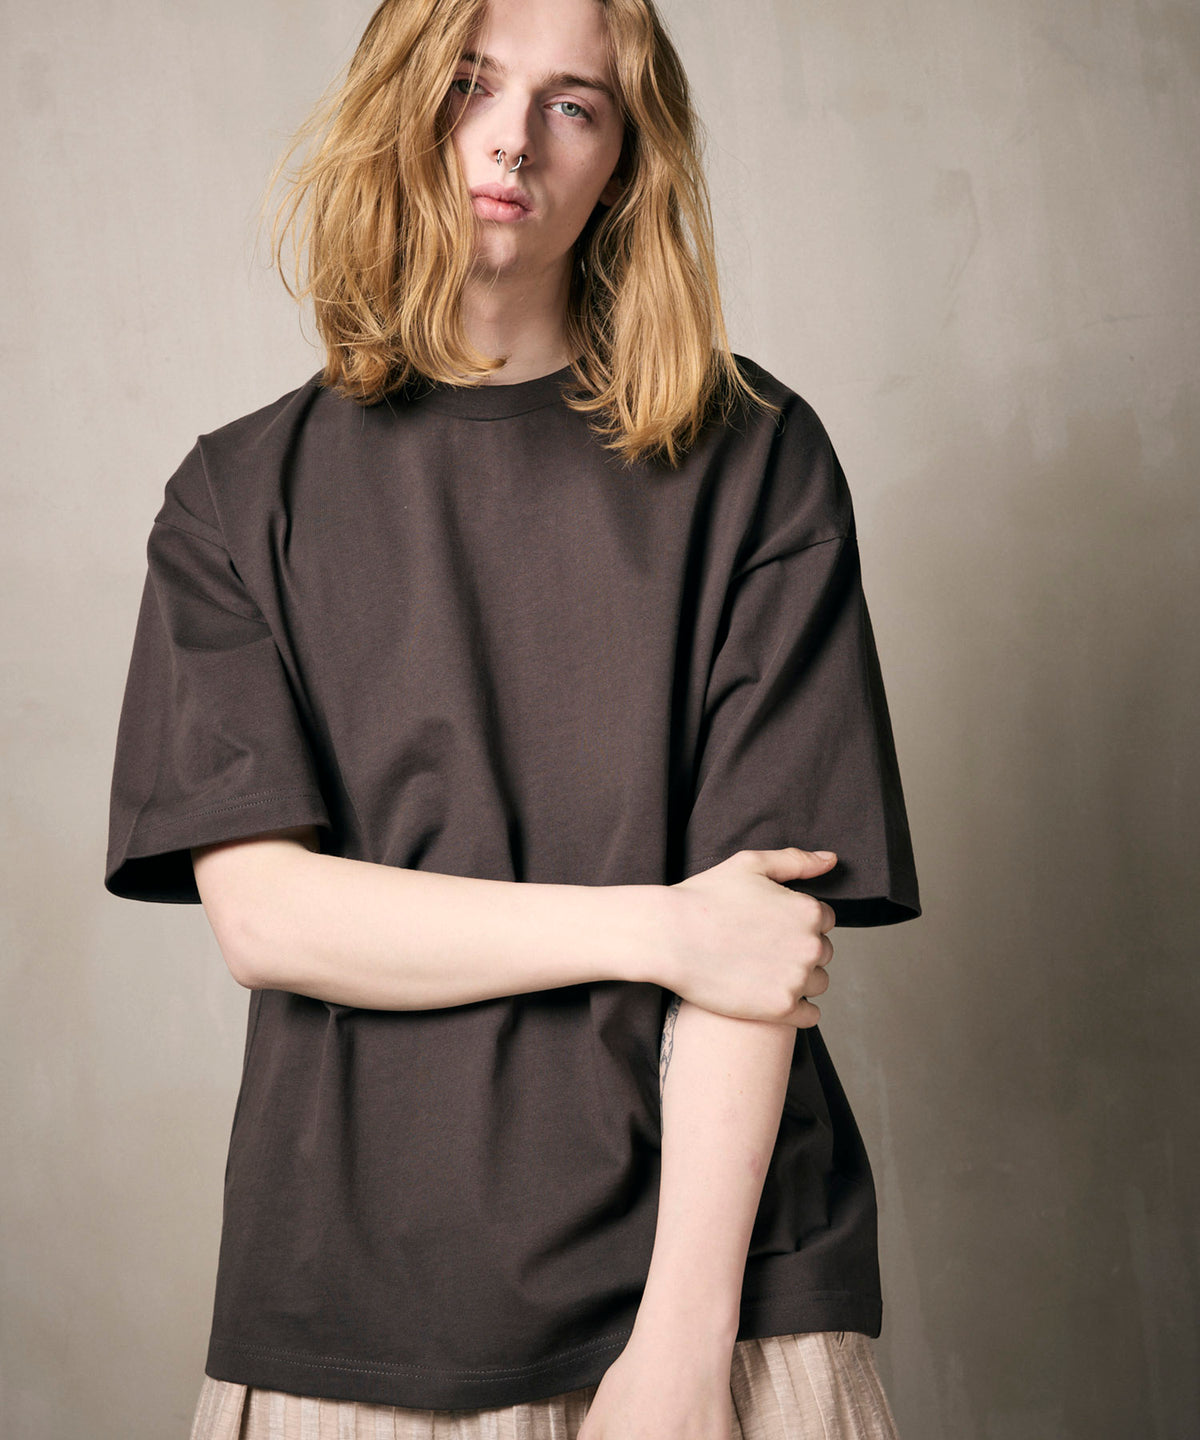 【24SS PRE-ORDER】13oz High Density Heavy-Weight Cotton Prime-Over Crew Neck T-shirt